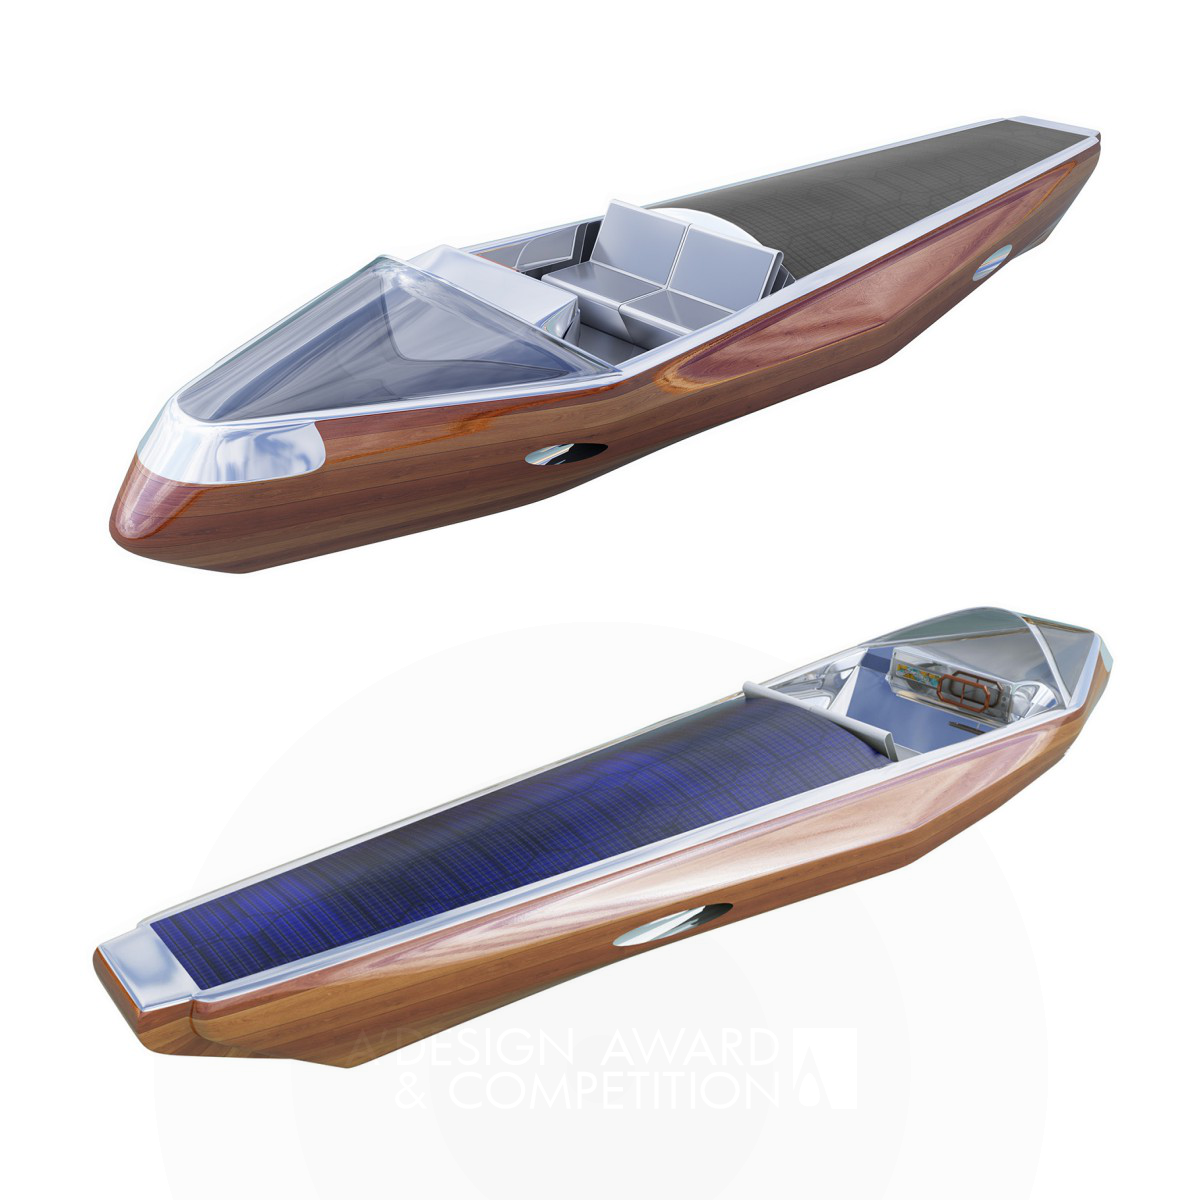 rhed Built Prototypes Boat